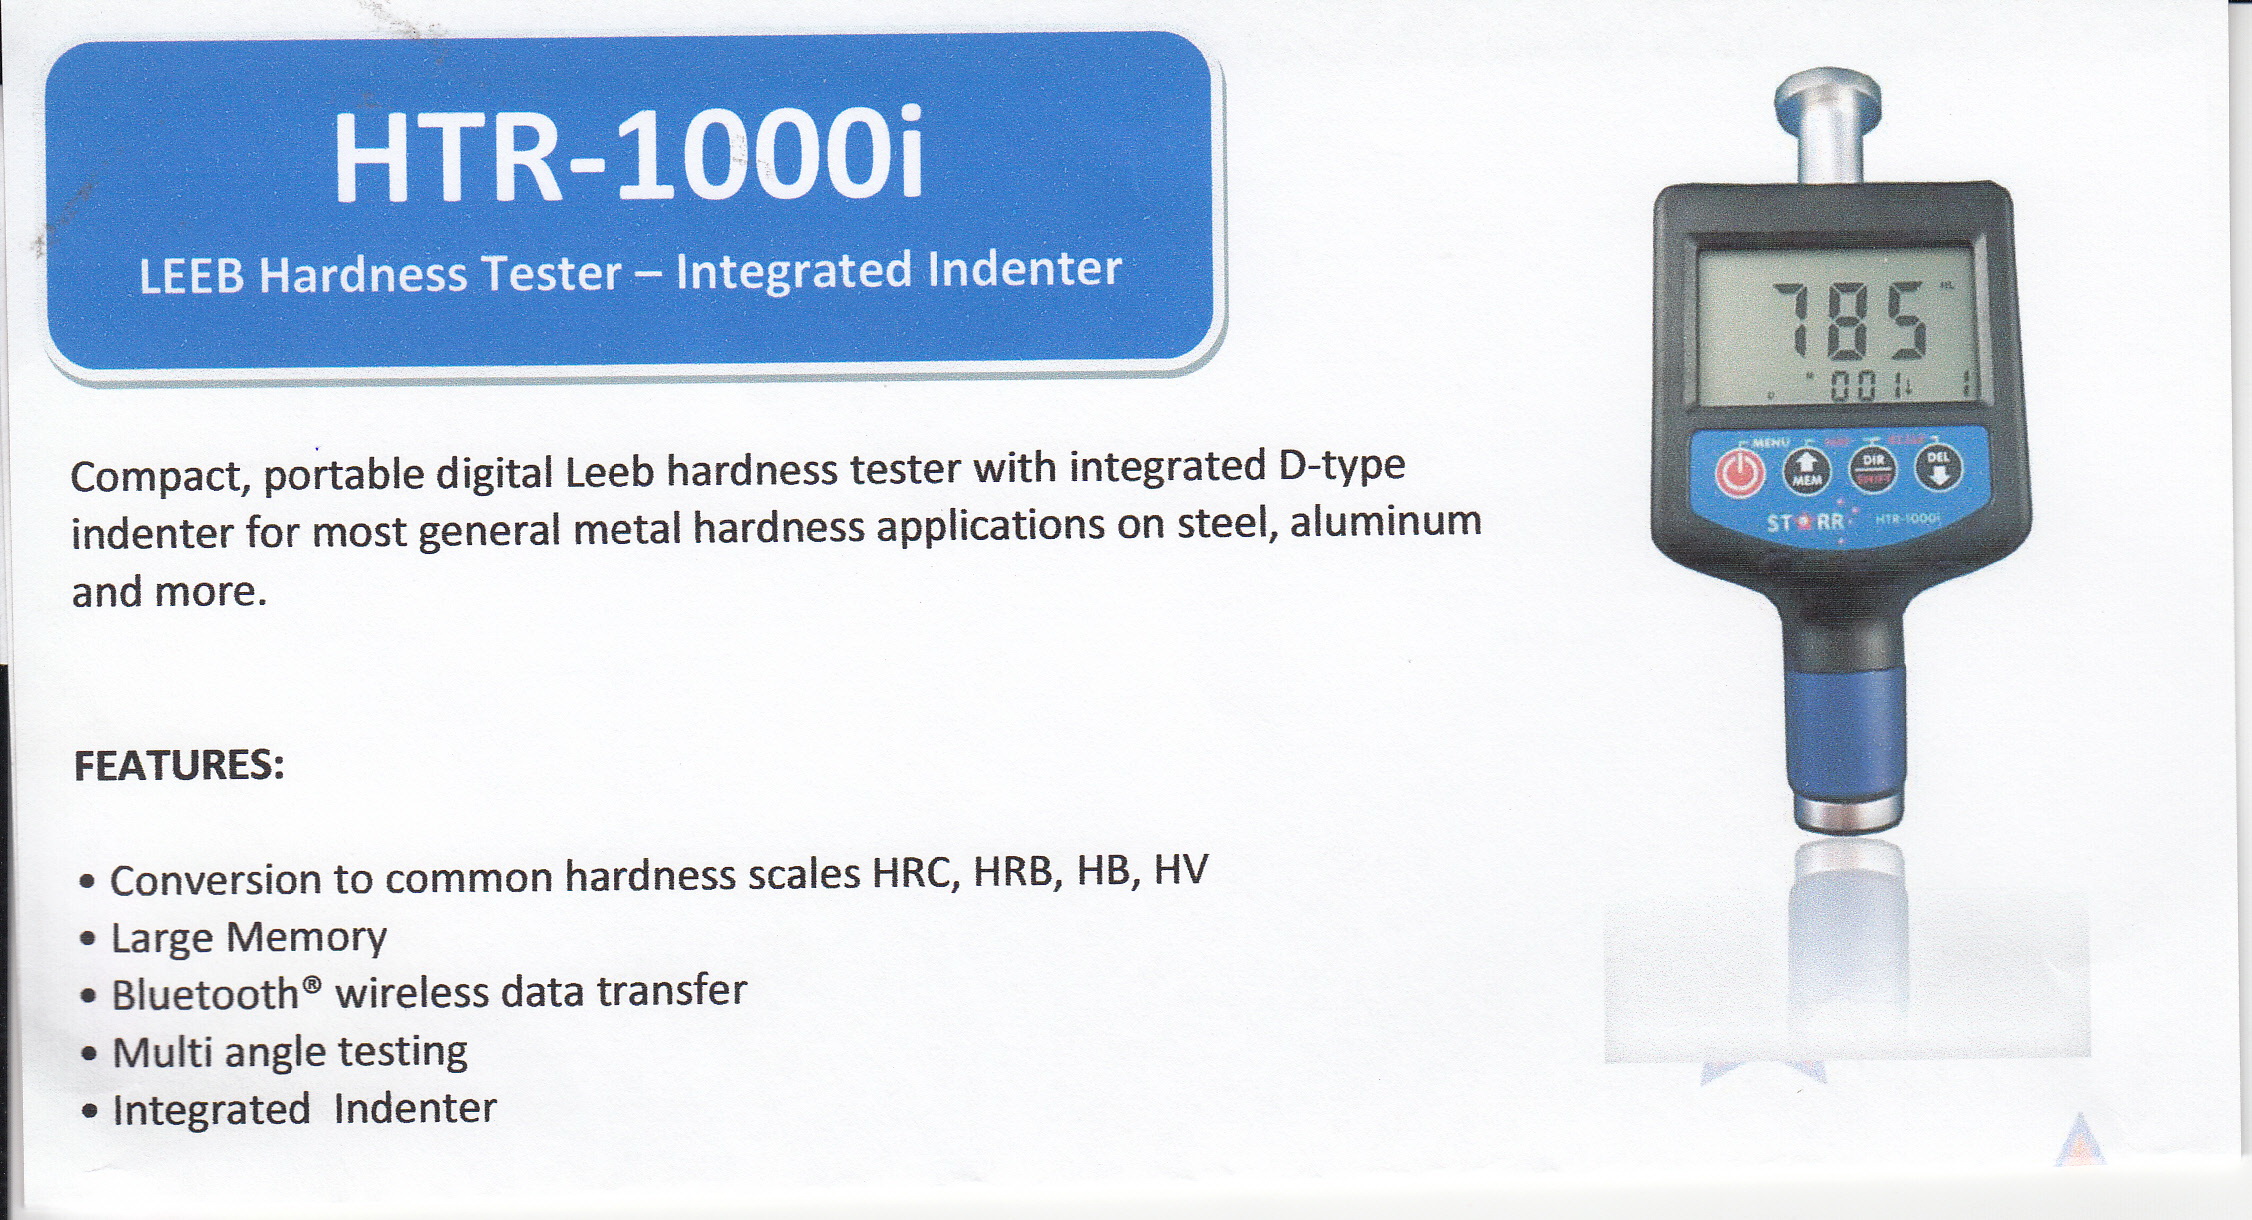 Announcing a New Hardness Tester